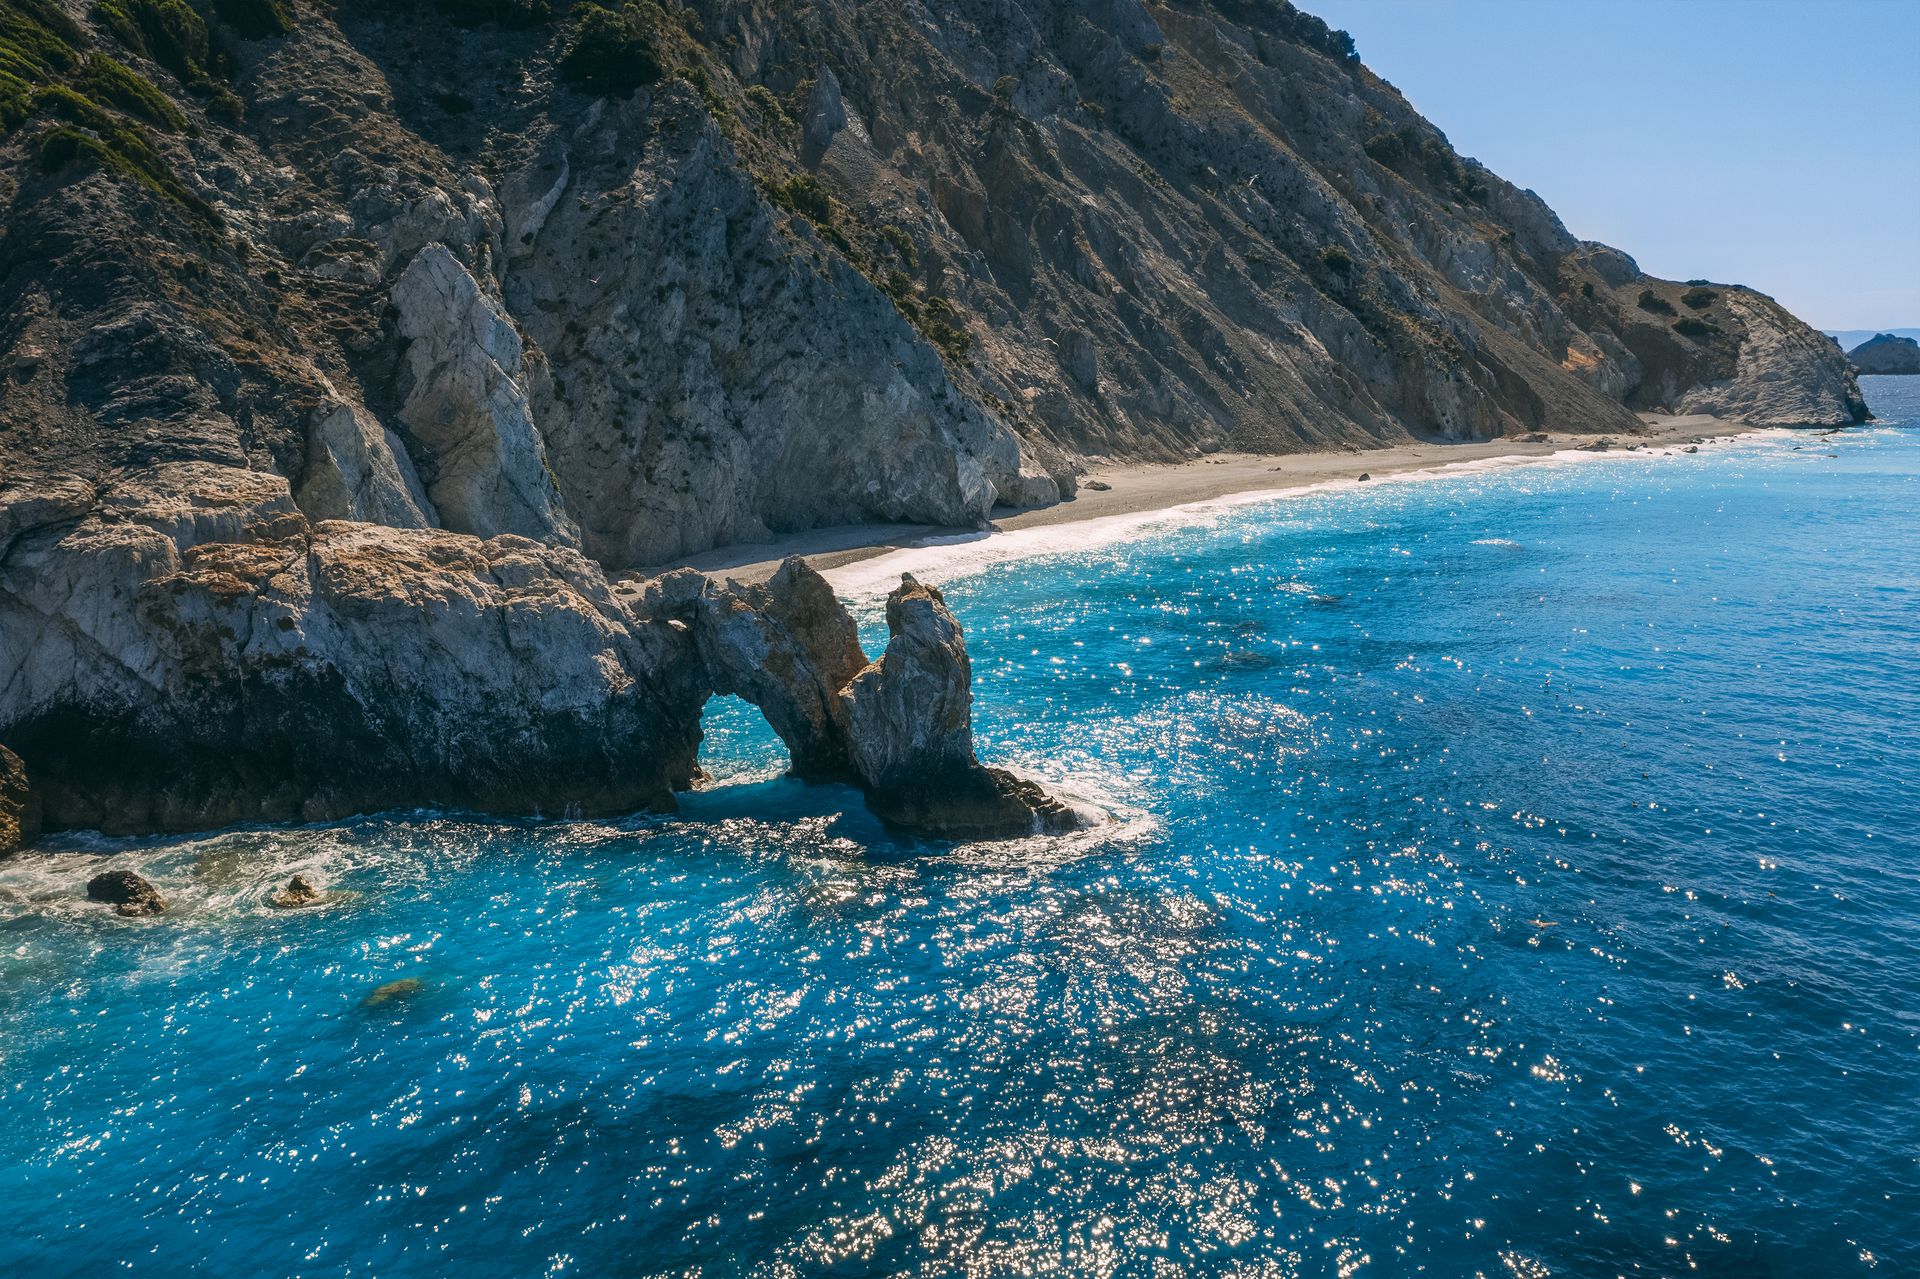 Lalaria, up on the north coast of Skiathos is unique for its smooth, pearly-white pebbles and dramatic cliff setting